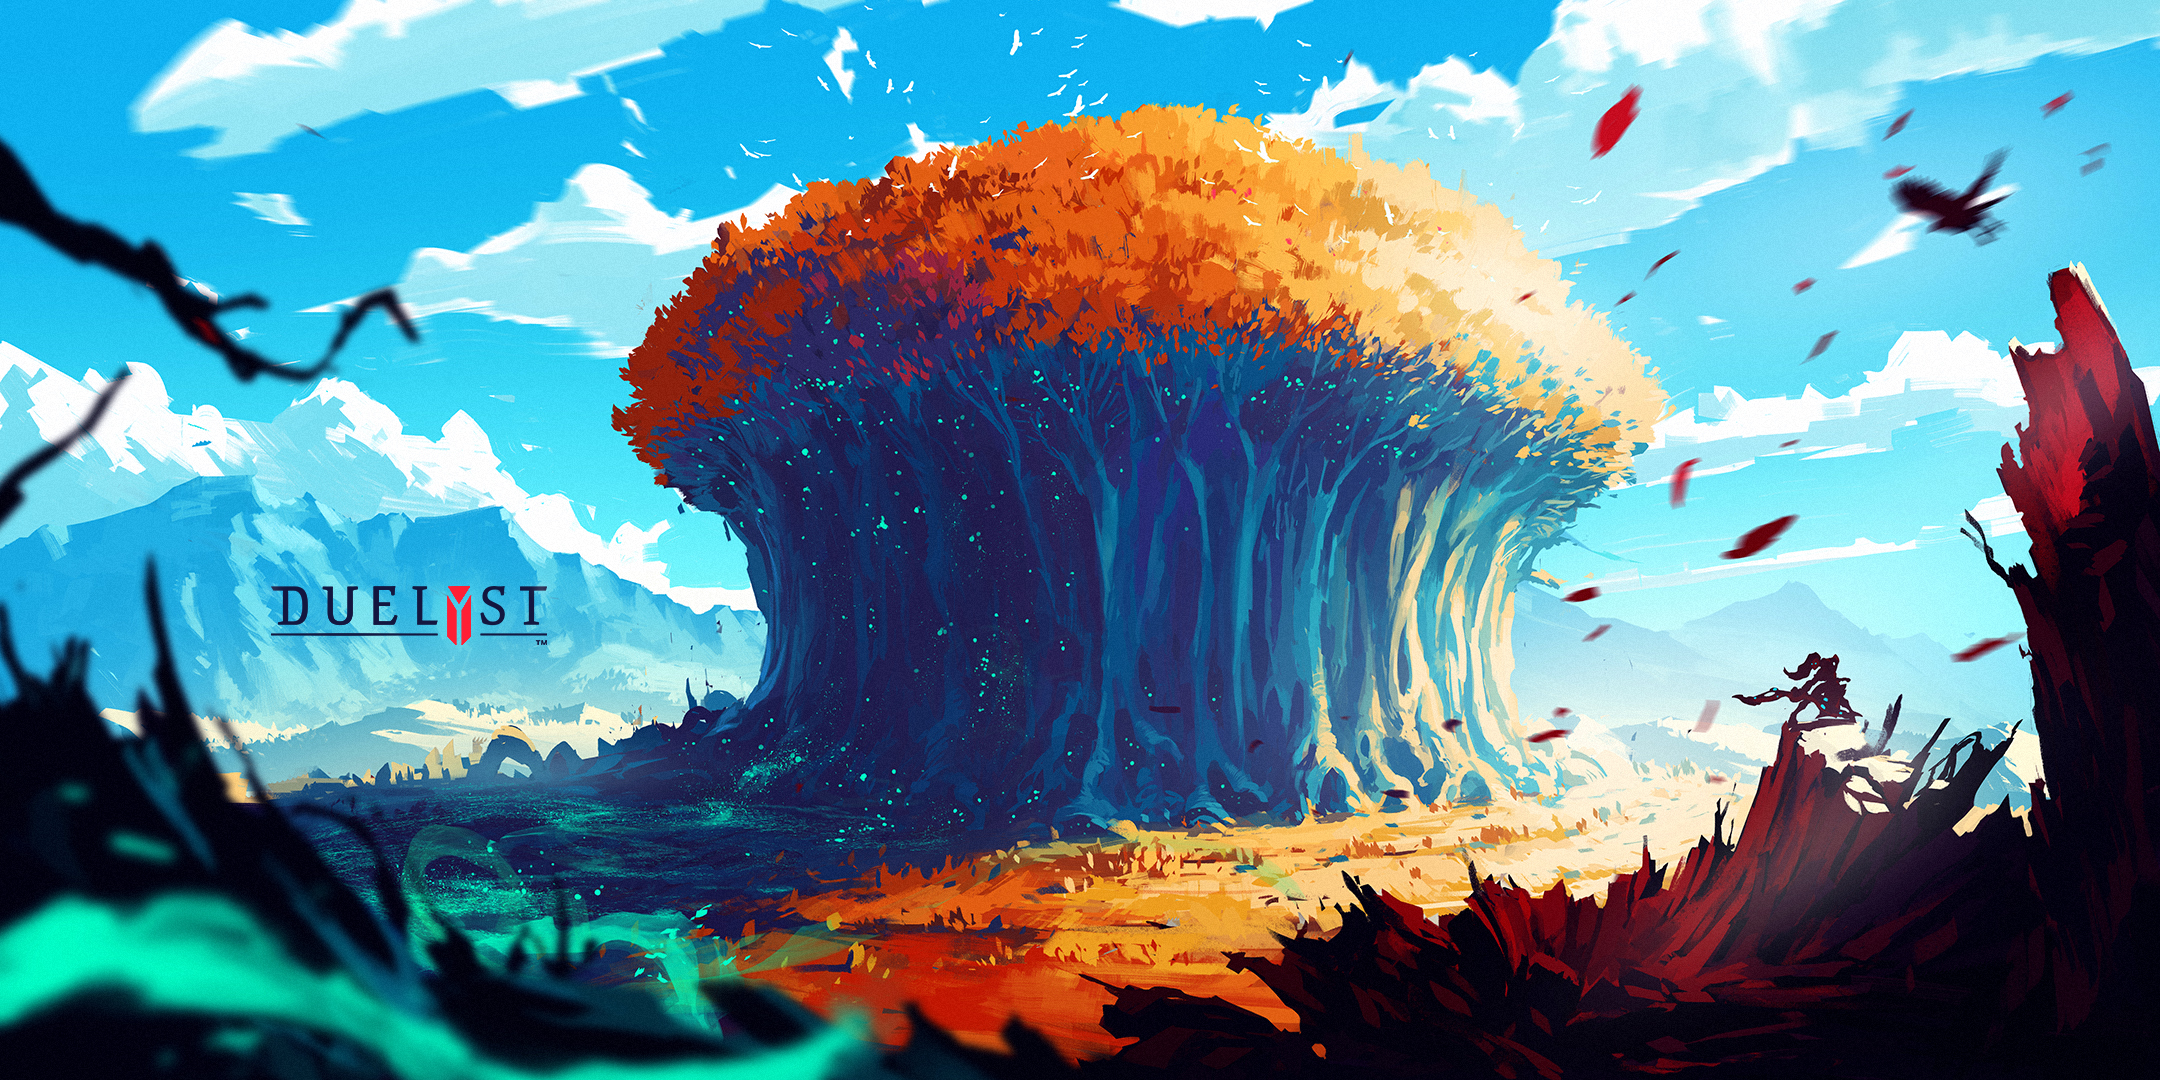 Nice wallpapers Duelyst 2160x1080px